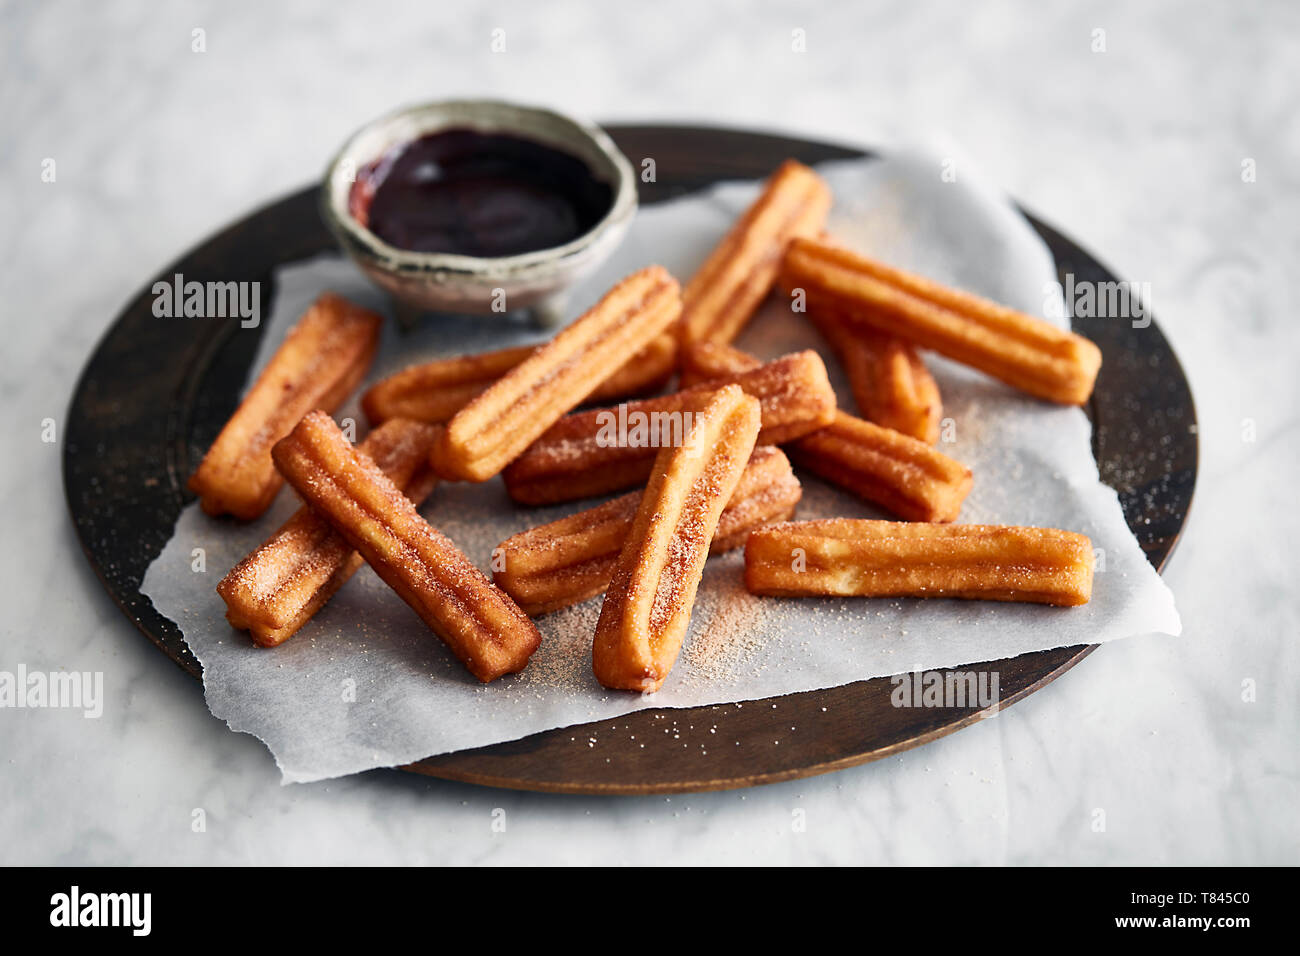 Churros and chocolate dipping Stock Photo